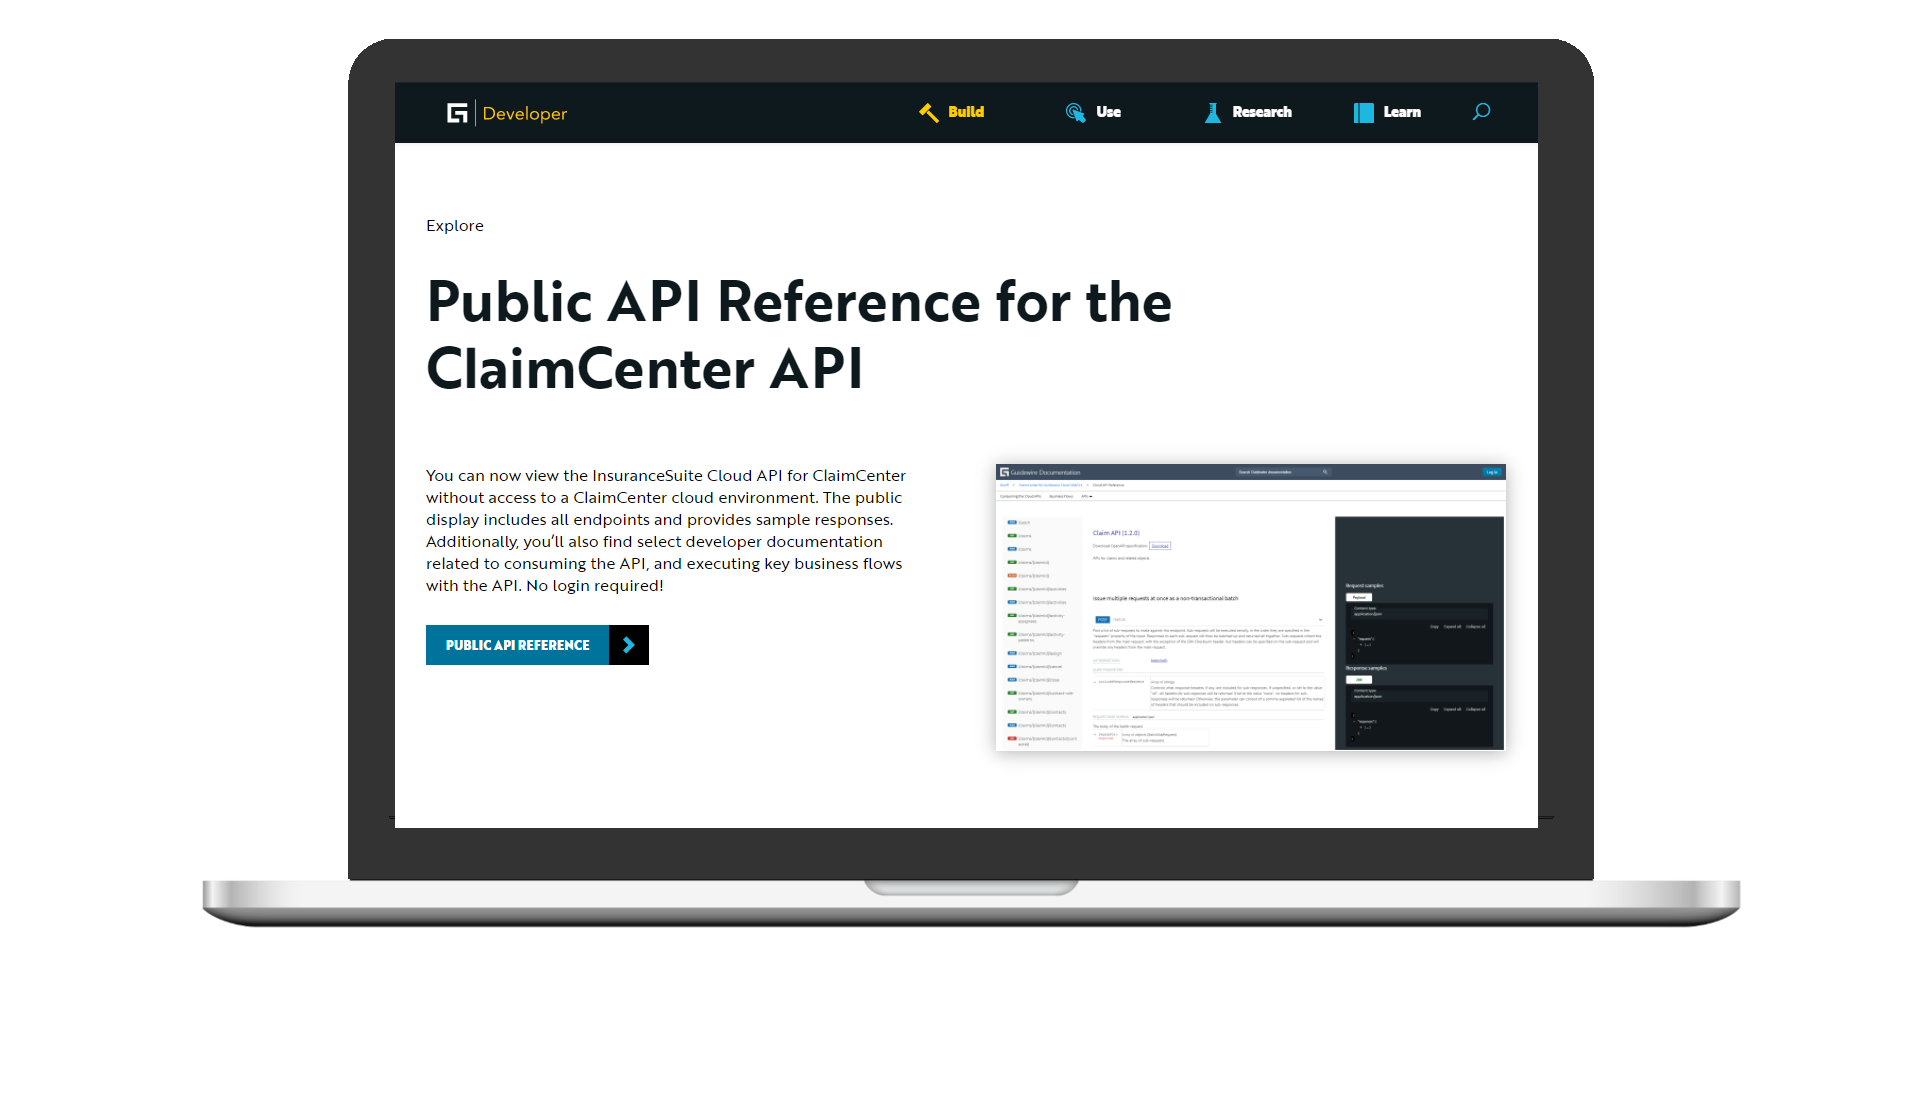 Explore the New InsuranceSuite API Reference for ClaimCenter